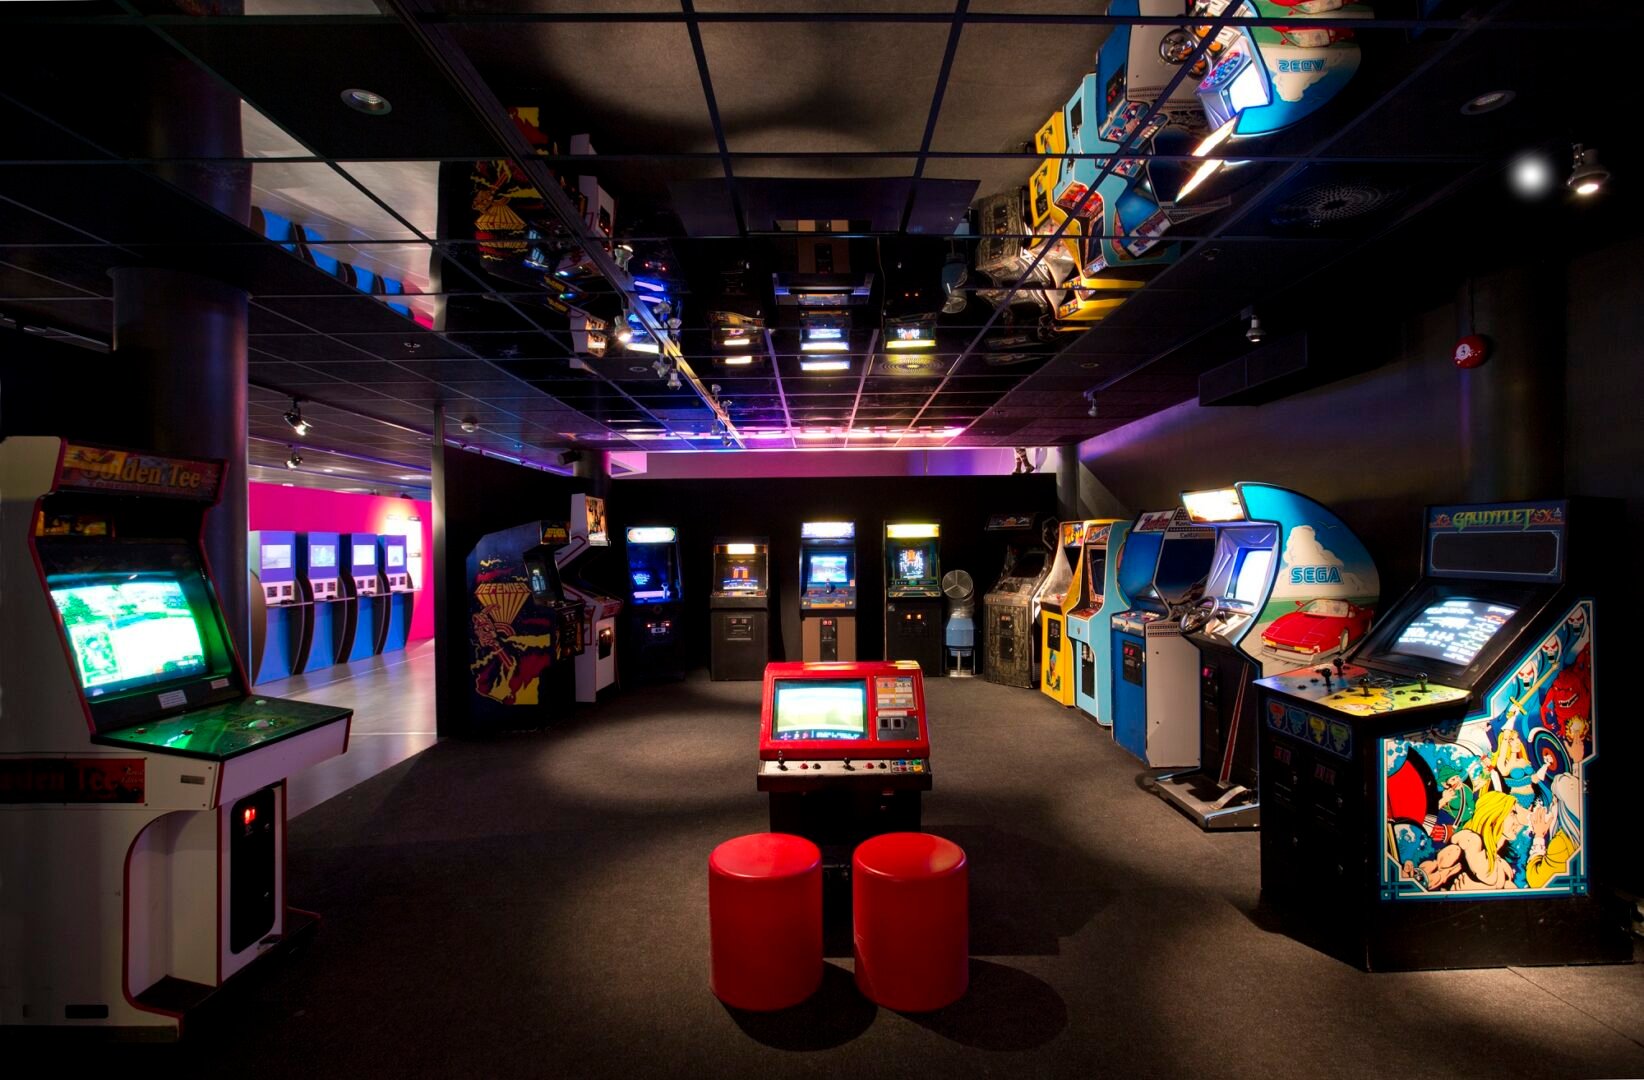 Arcade machines and computers with games set up for museum exhibition.